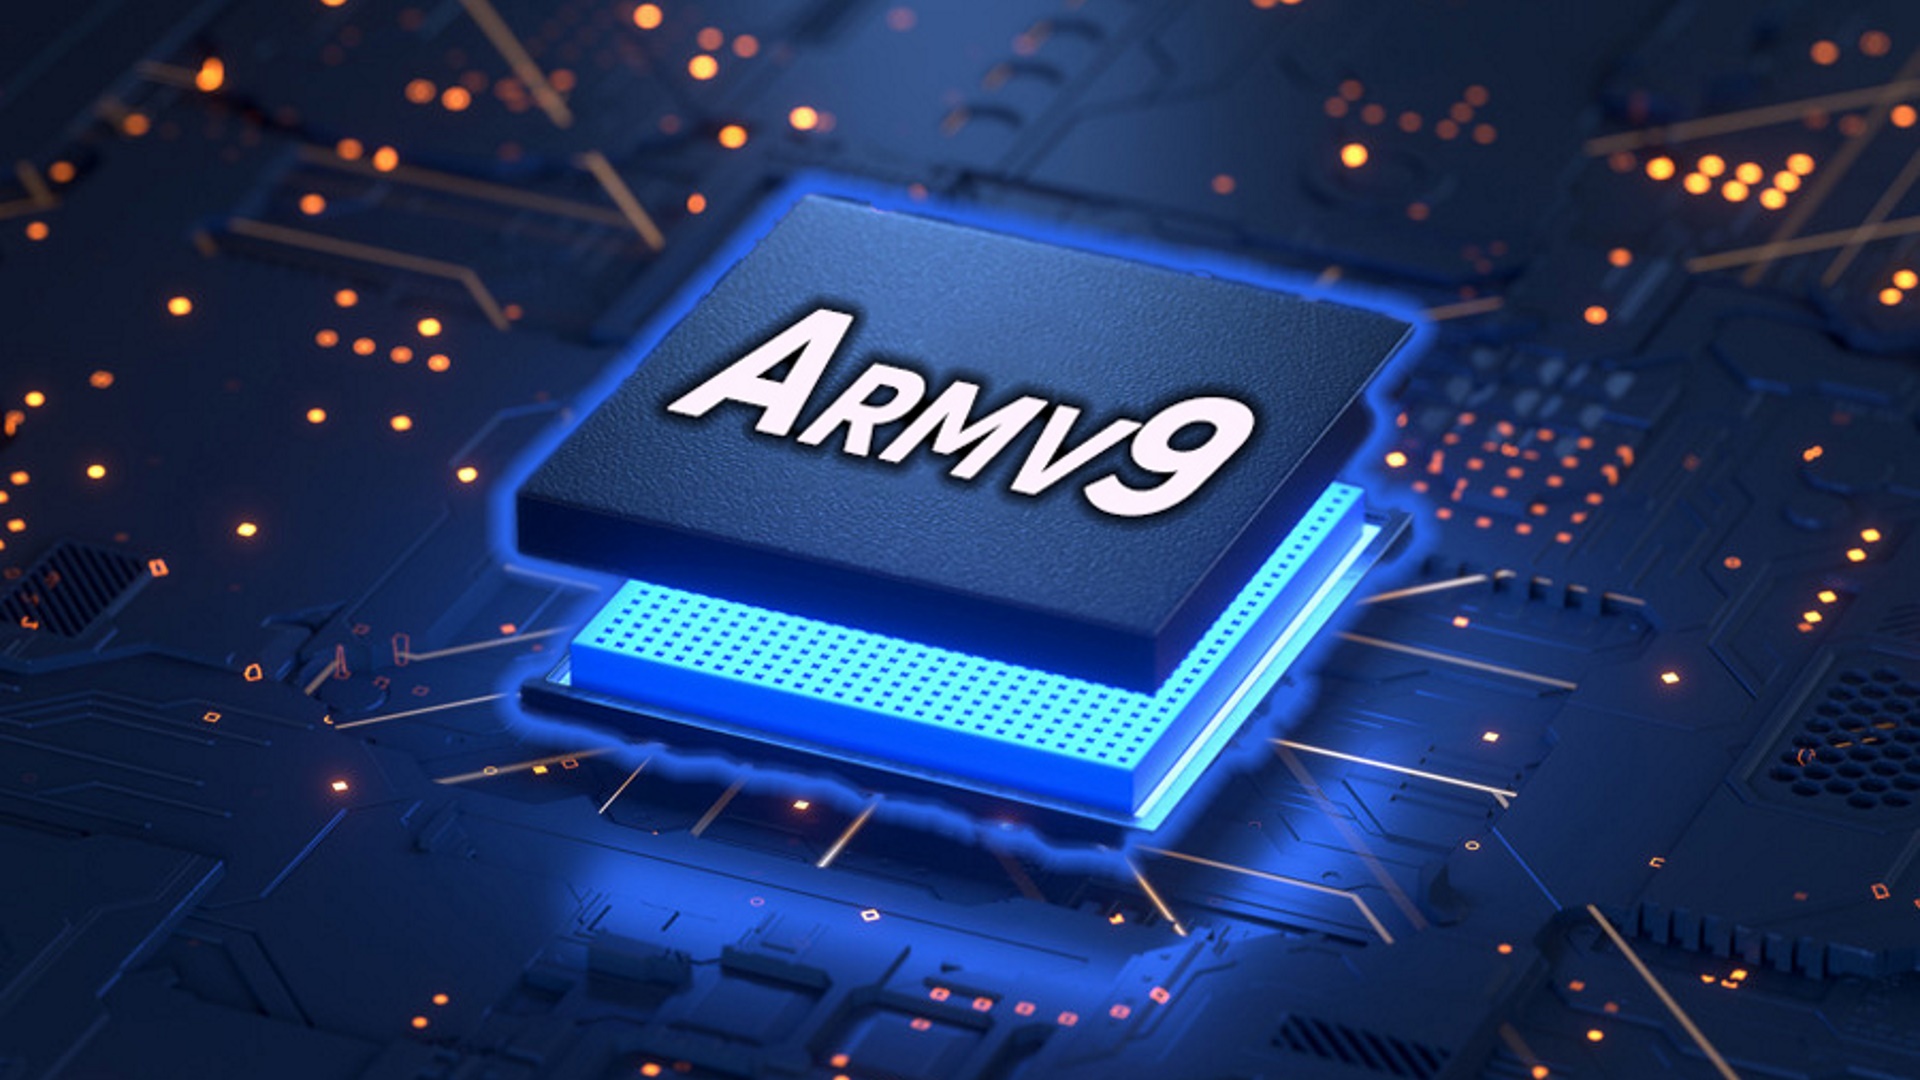 armv9 logo on a glowing chip